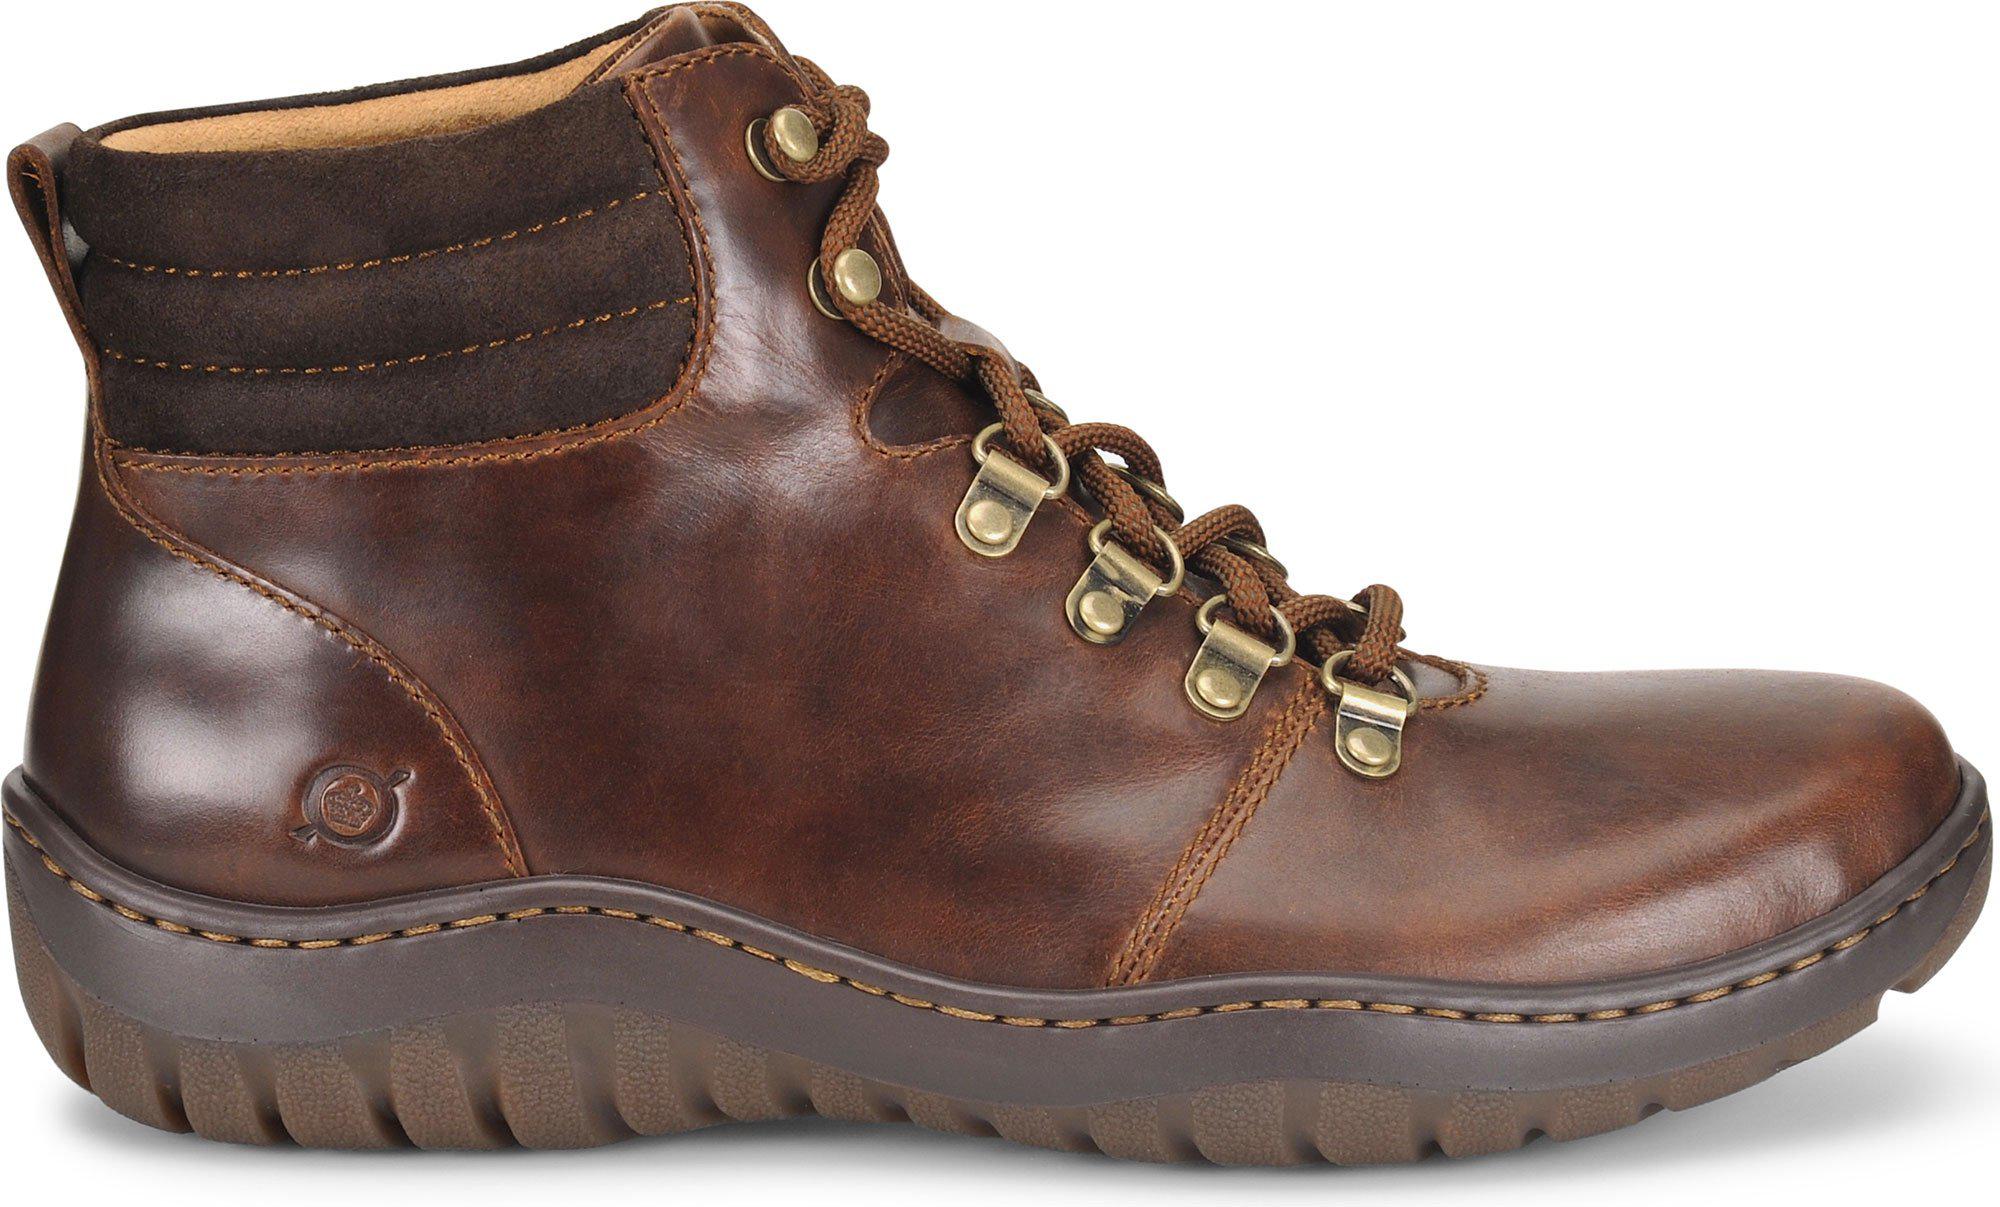 Lyst - Born Shoes Dutchman Boot in Brown for Men